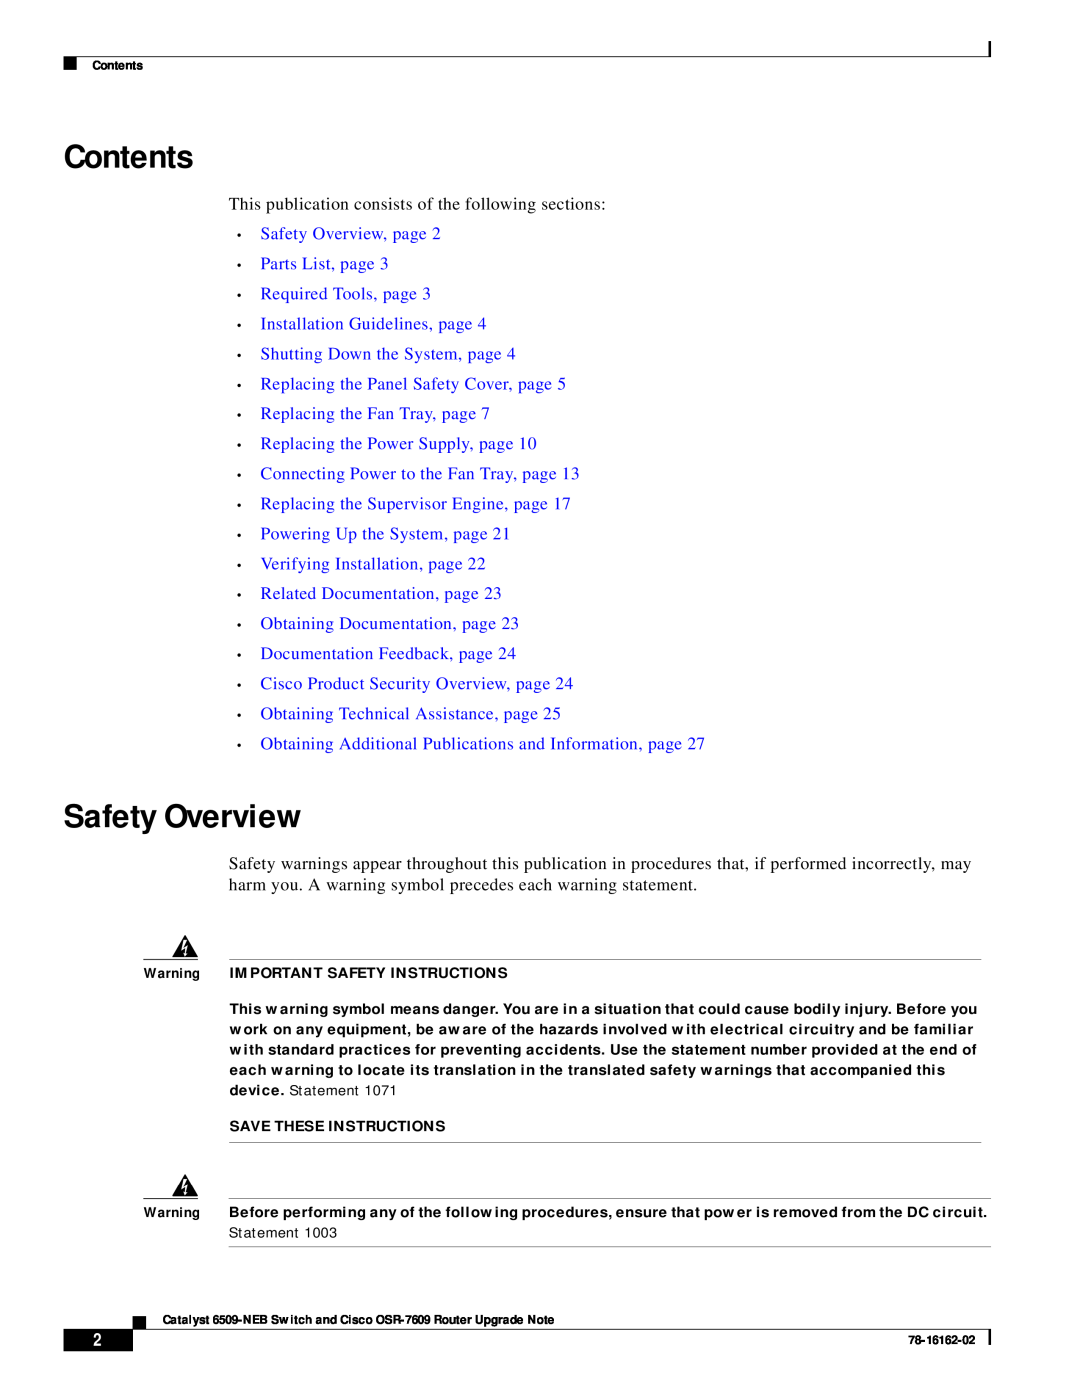 Cisco Systems 6509-NEB Contents, Safety Overview, page Parts List, page Required Tools, page, Save These Instructions 